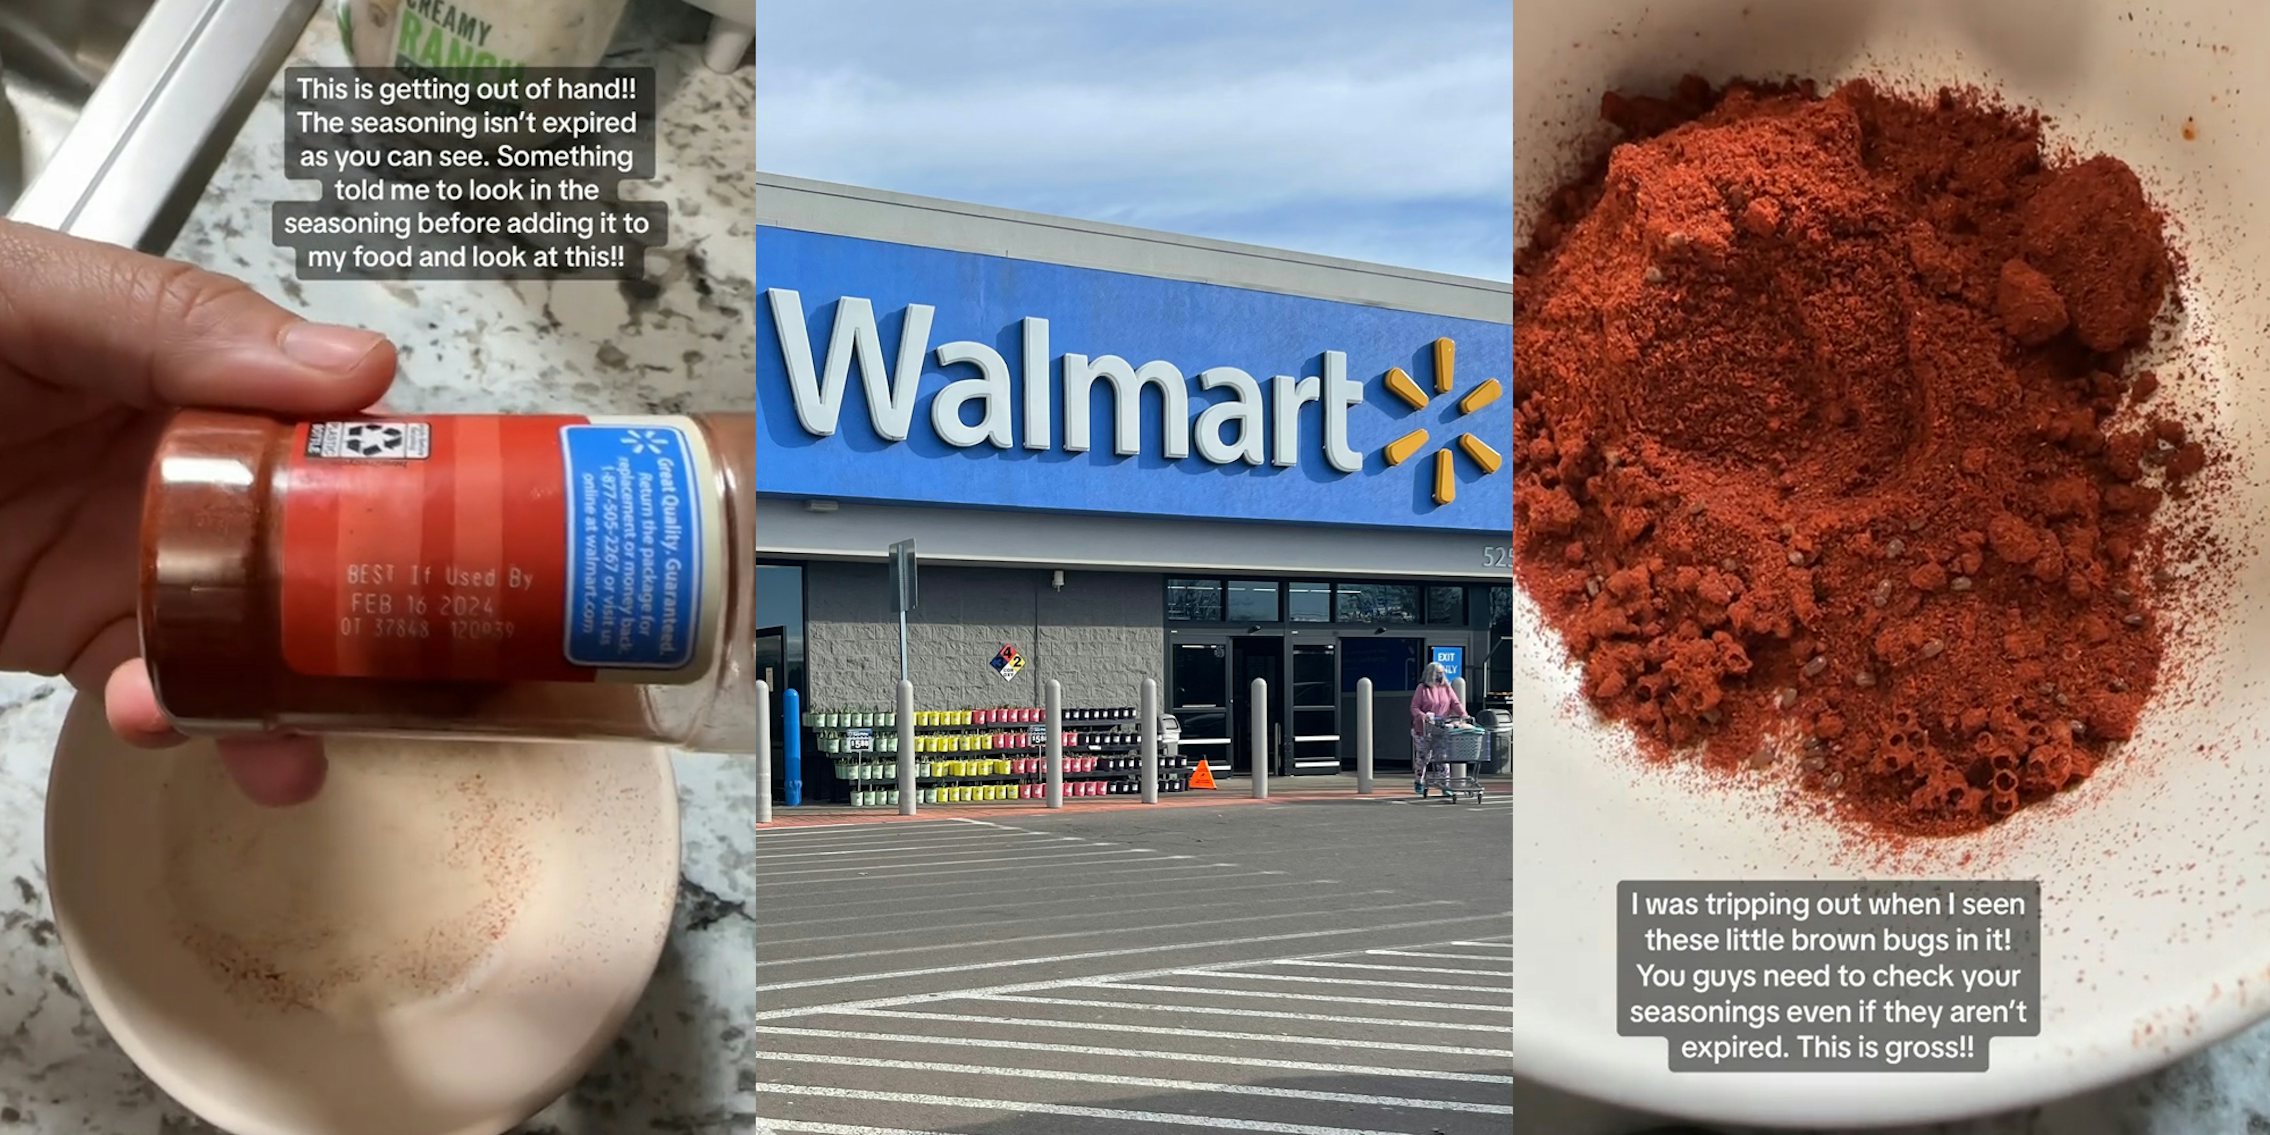 hand holding Walmart seasoning in bottle with caption 'This is getting out of hand!! The seasoning isn't expired as you can see. Something told me to look in the seasoning before adding it to my food and look at this' (l) Walmart building with sign (c) seasonings in bowl with bugs with caption 'I was tripping out when I seen these little brown bugs in it! You guys need to check your seasonings even if they aren't expired. This is gross!!' (r)